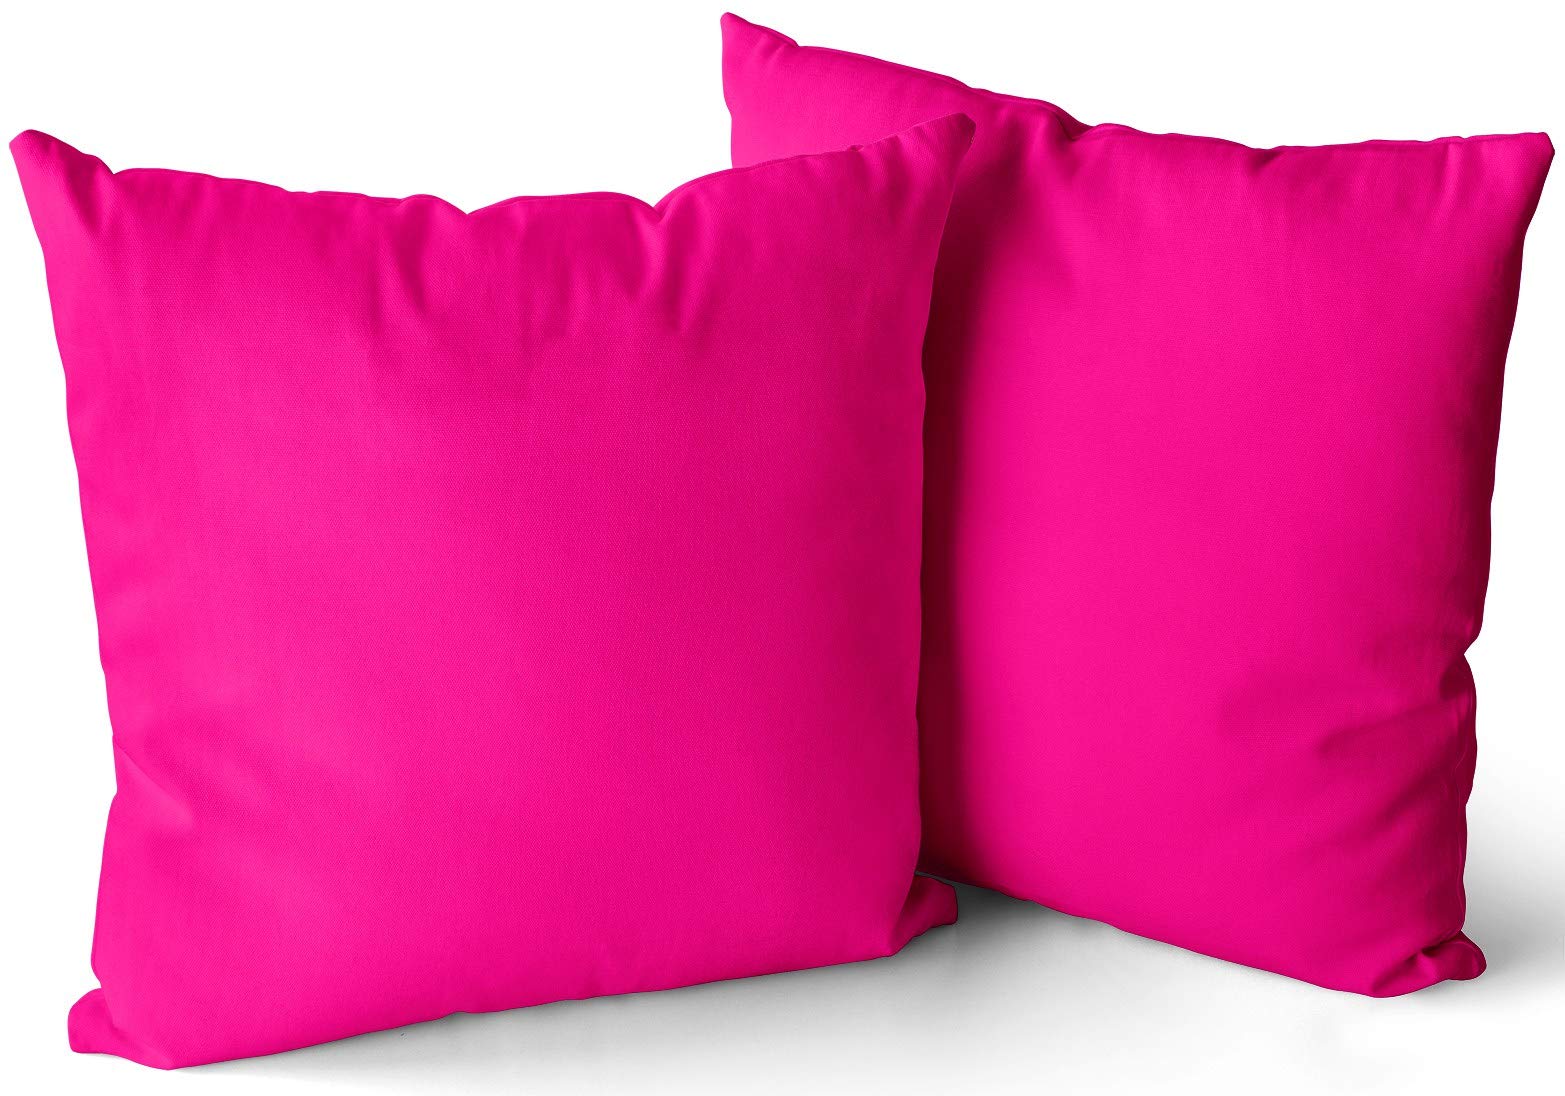 KELEMO Home Set of 2 Pillow Case Girly Fushia Hot Pink Friendly Throw Pillow Covers Cushion Decorative Pillowcase Square 18 x 18 Inches